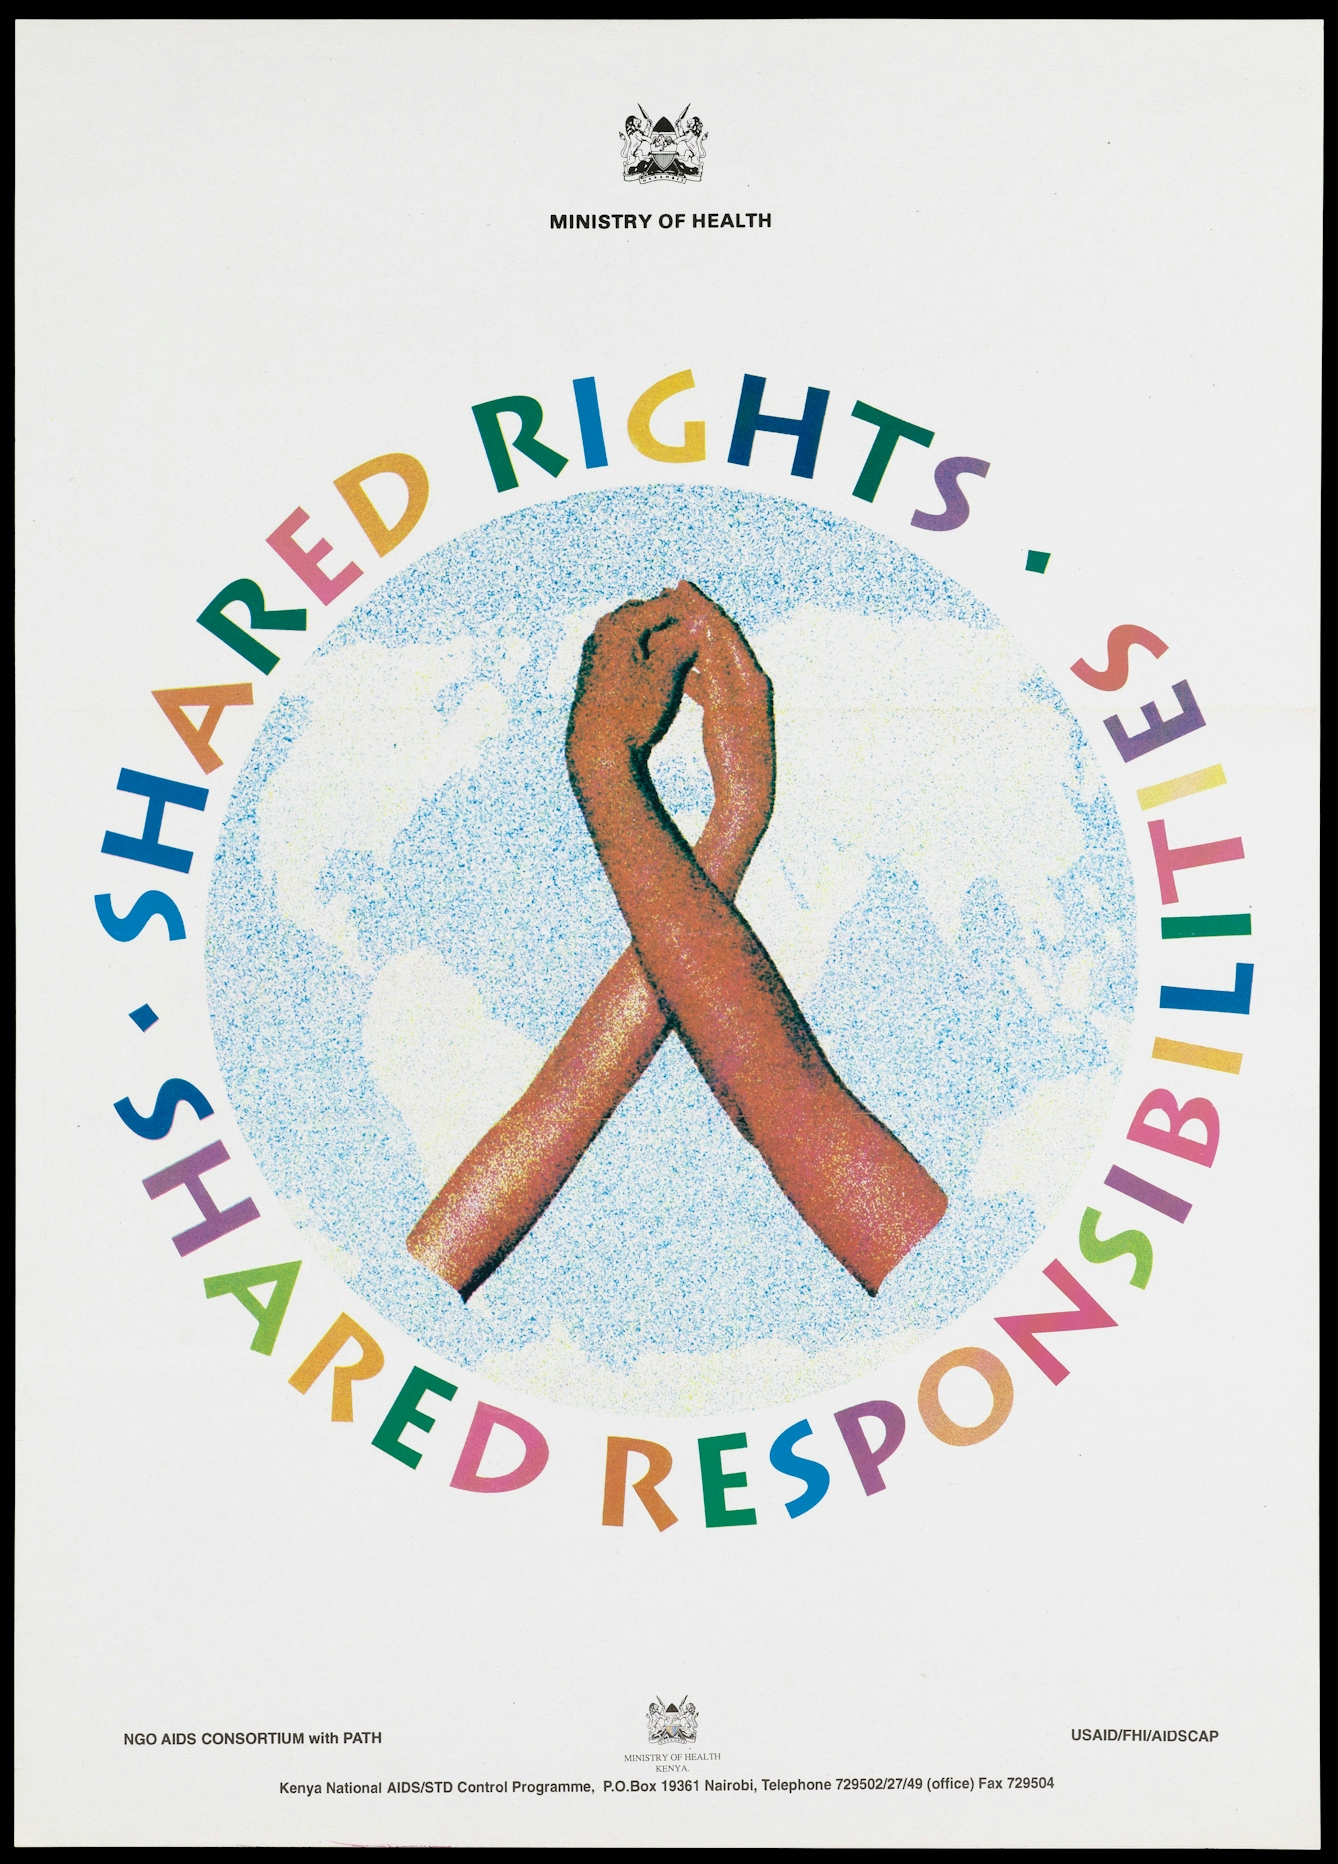 Two hands wrap around each other to form the shape of the AIDS red ribbon against a grainy backdrop of the world within a circle inscribed with the slogan 'Shared rights. Shared responsibility'; an advertisement by the Kenya National AIDS/STD Control Programme, part of the Kenya Ministry of Health. Colour lithograph, 1997.